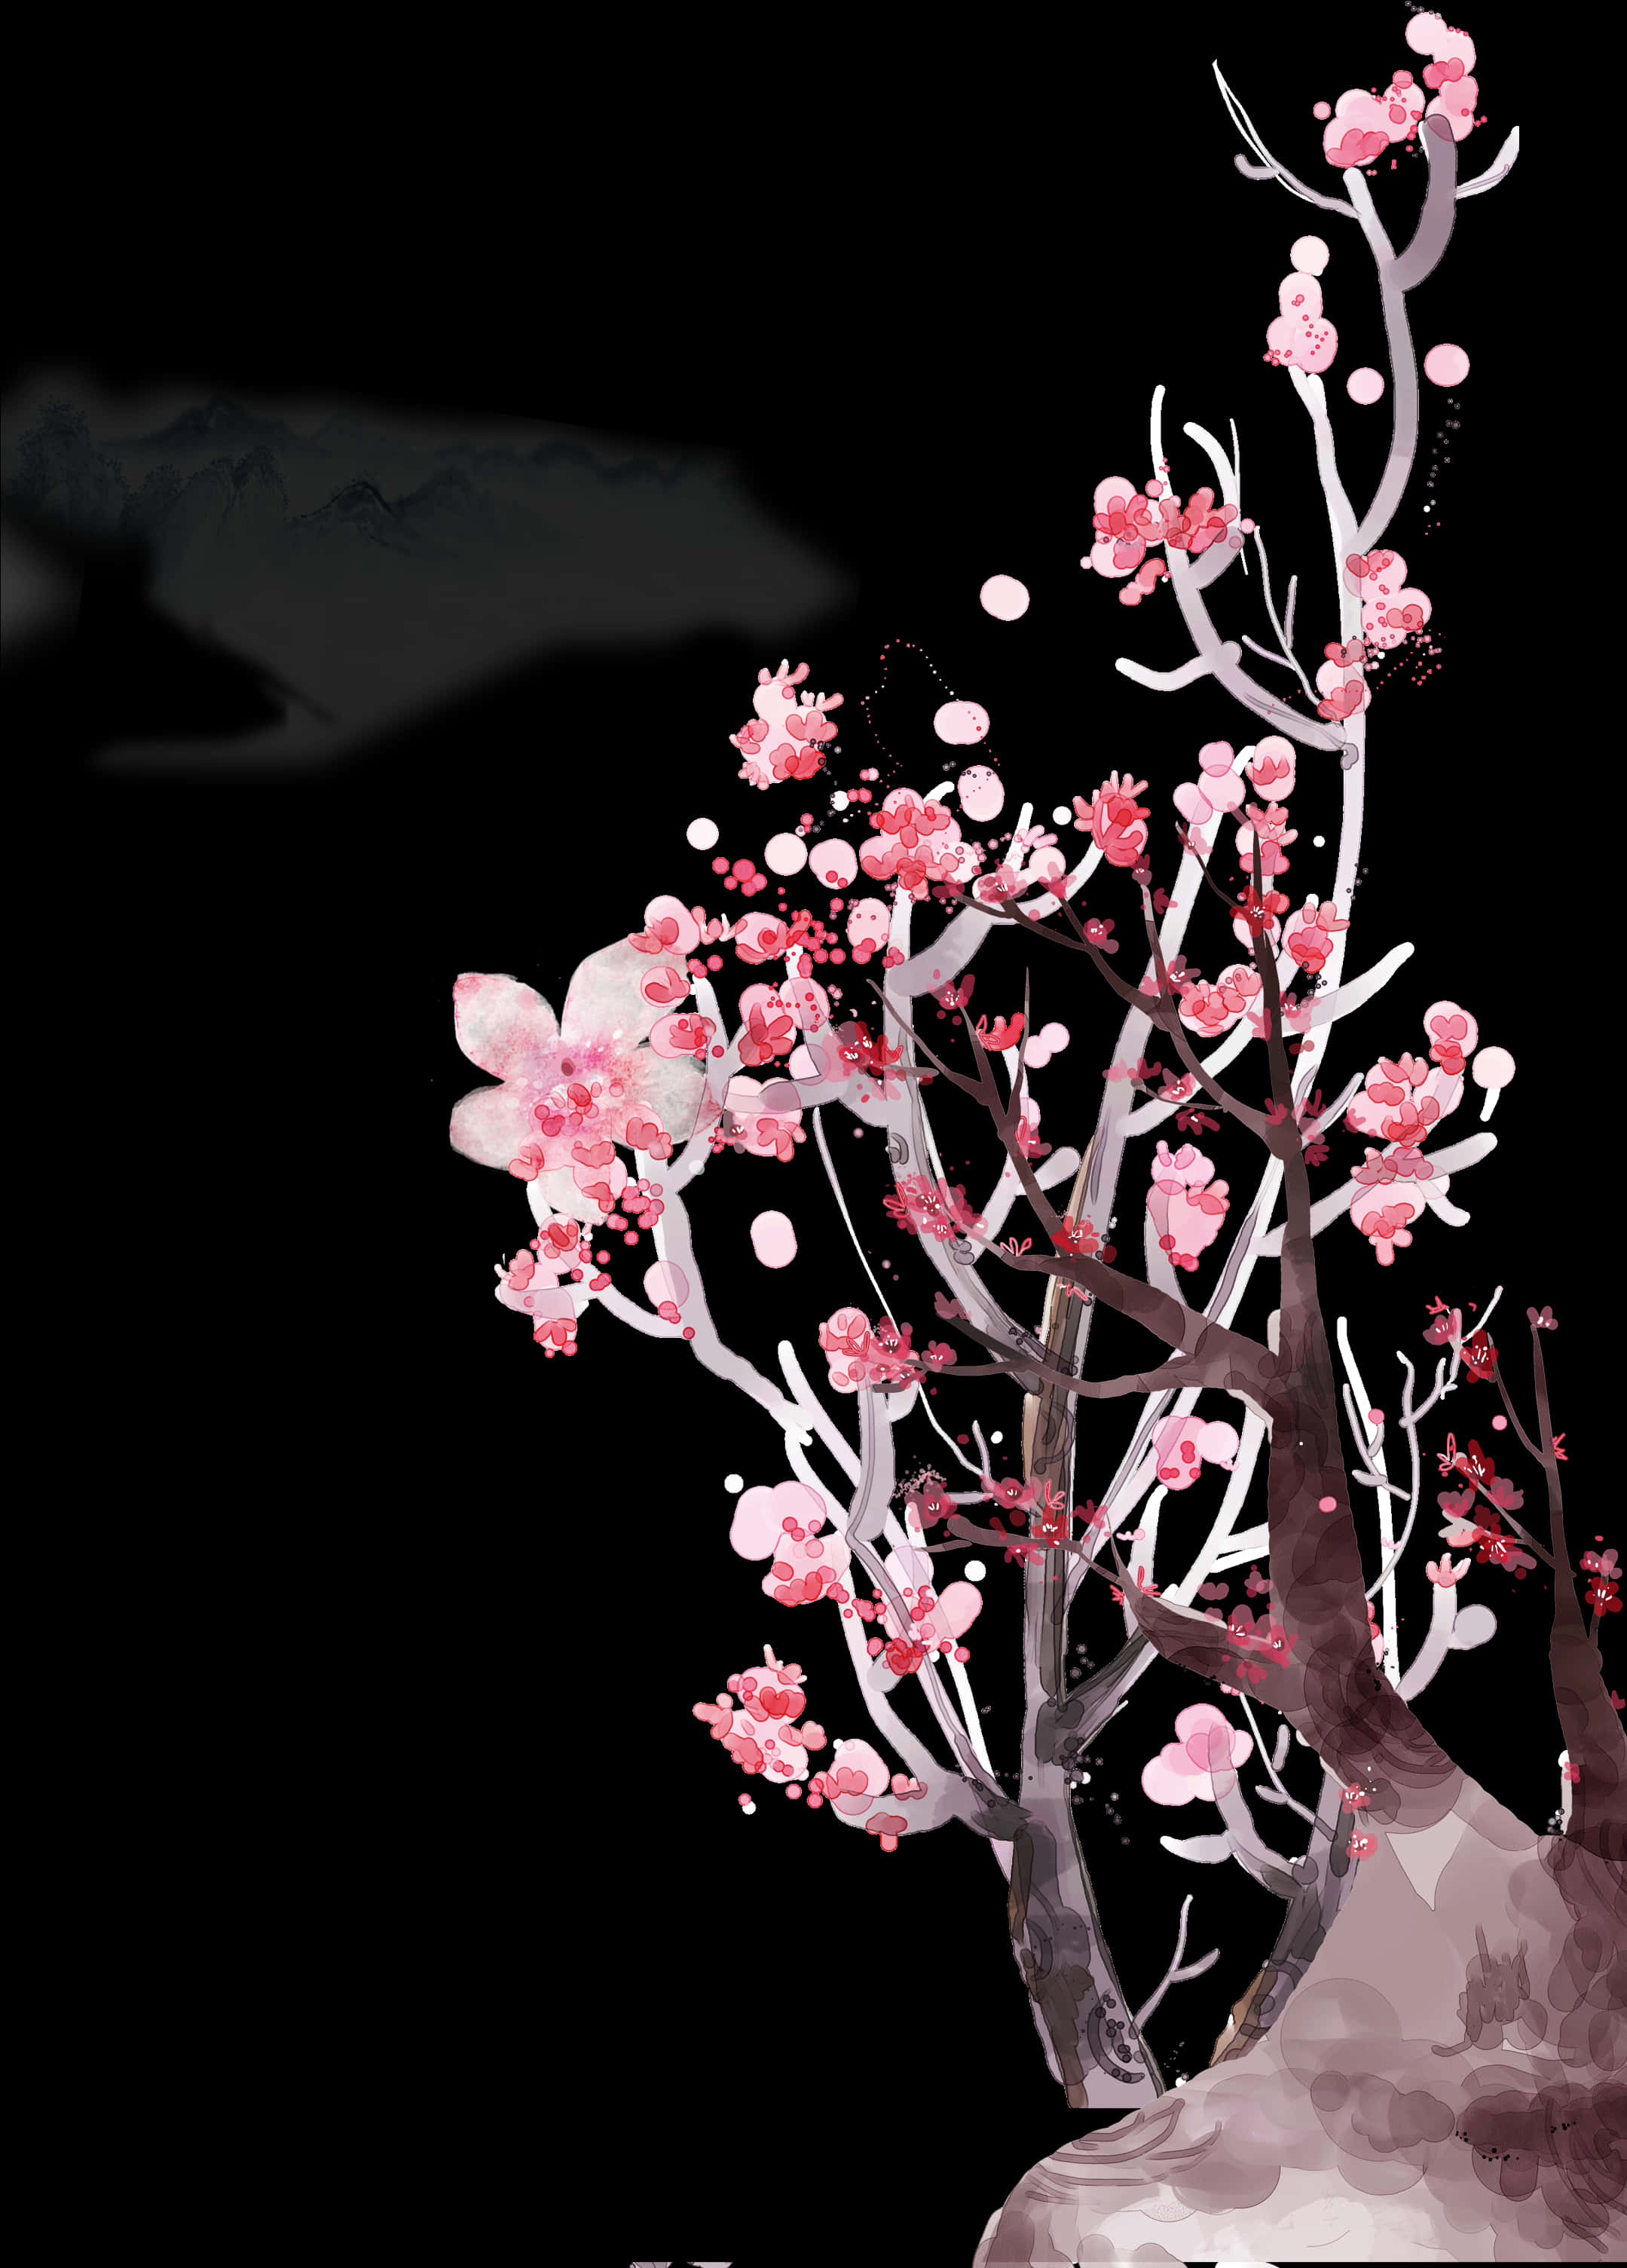 A Painting Of A Tree With Pink Flowers